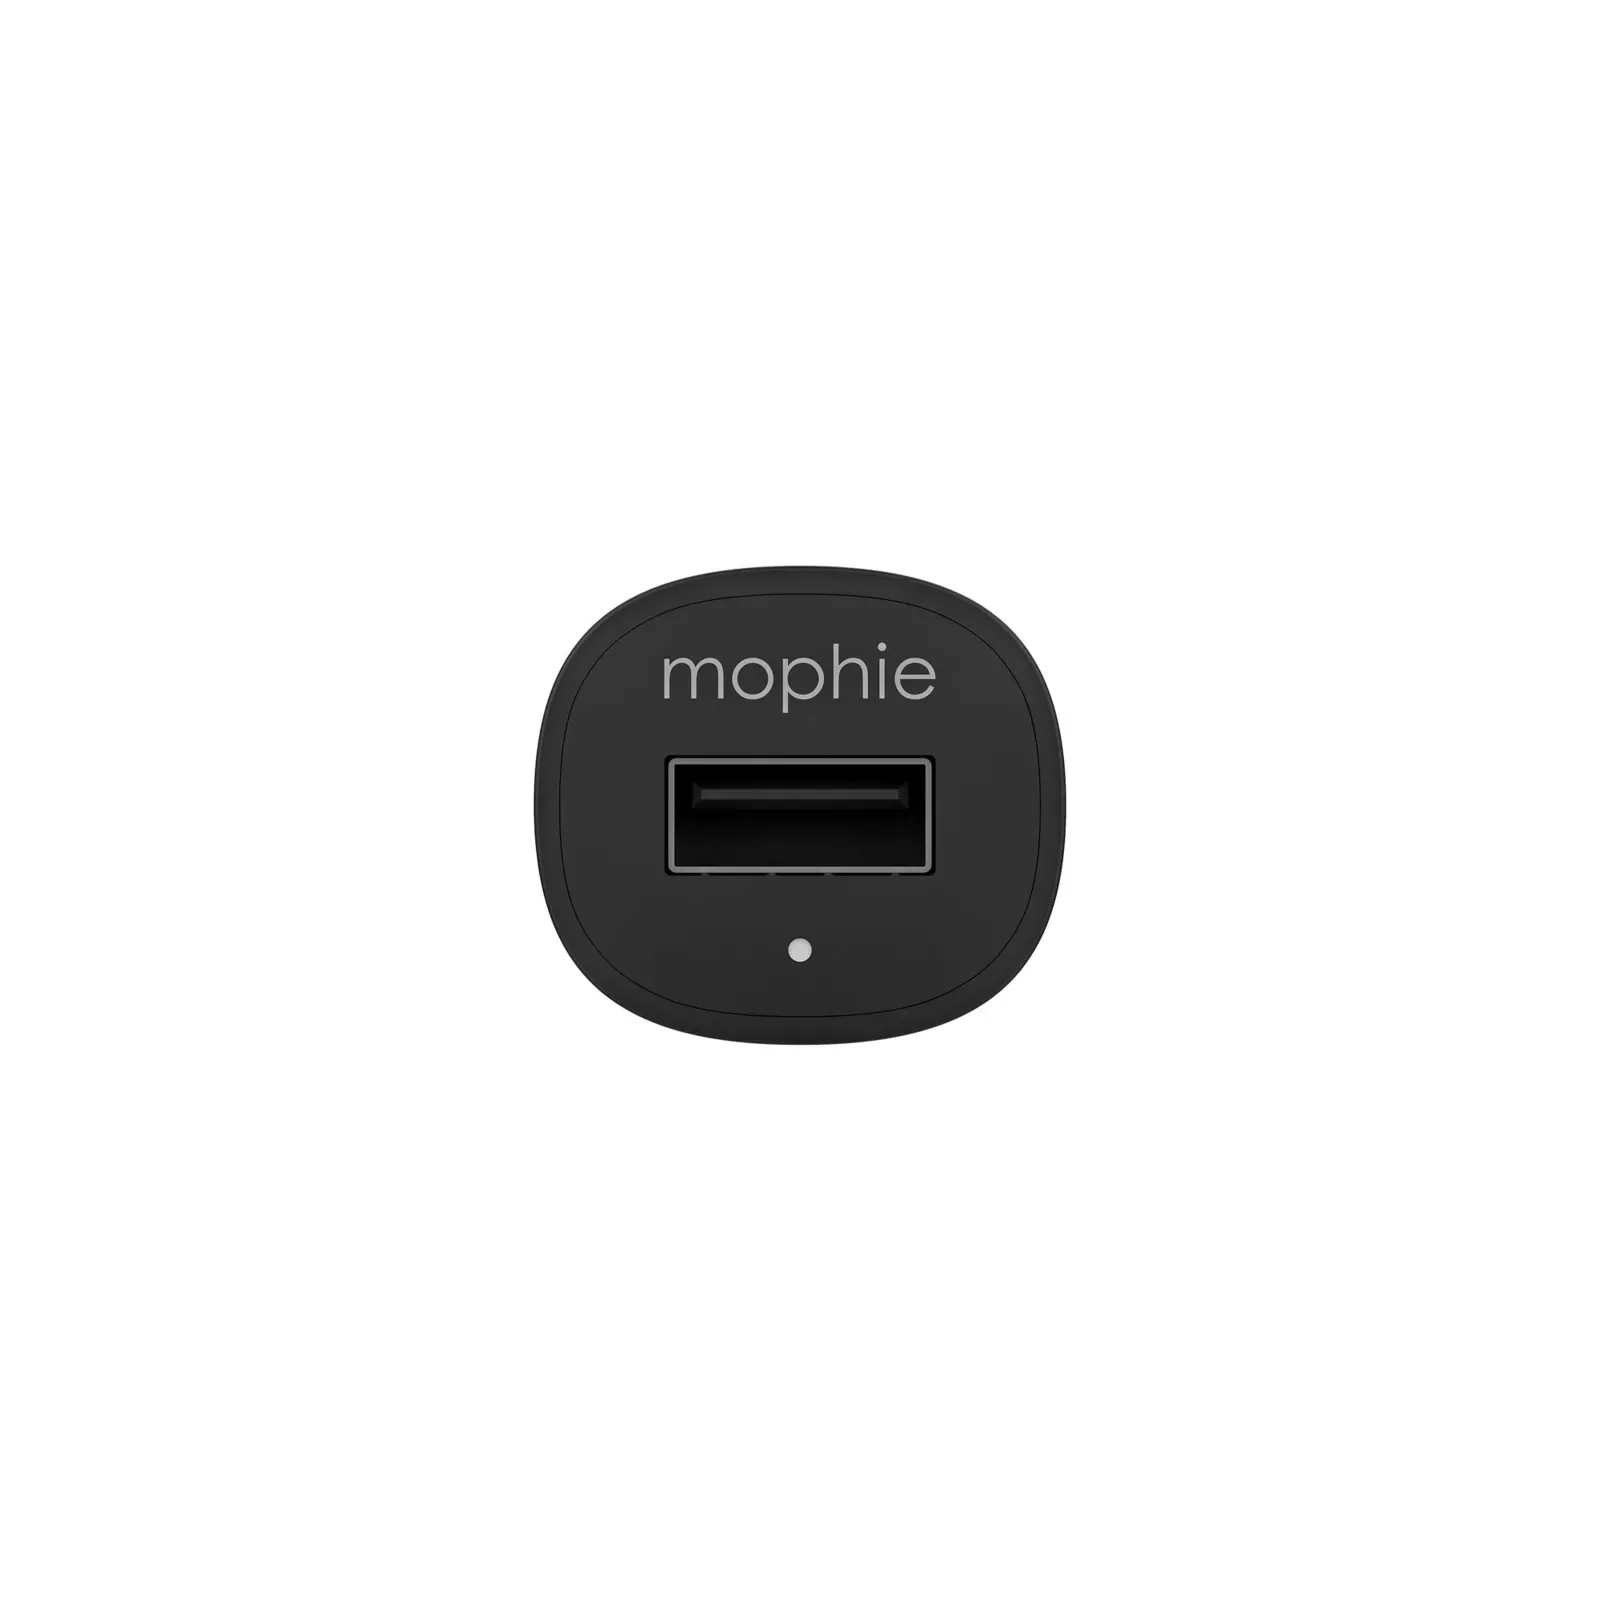 Mophie 409901475 Photo 8